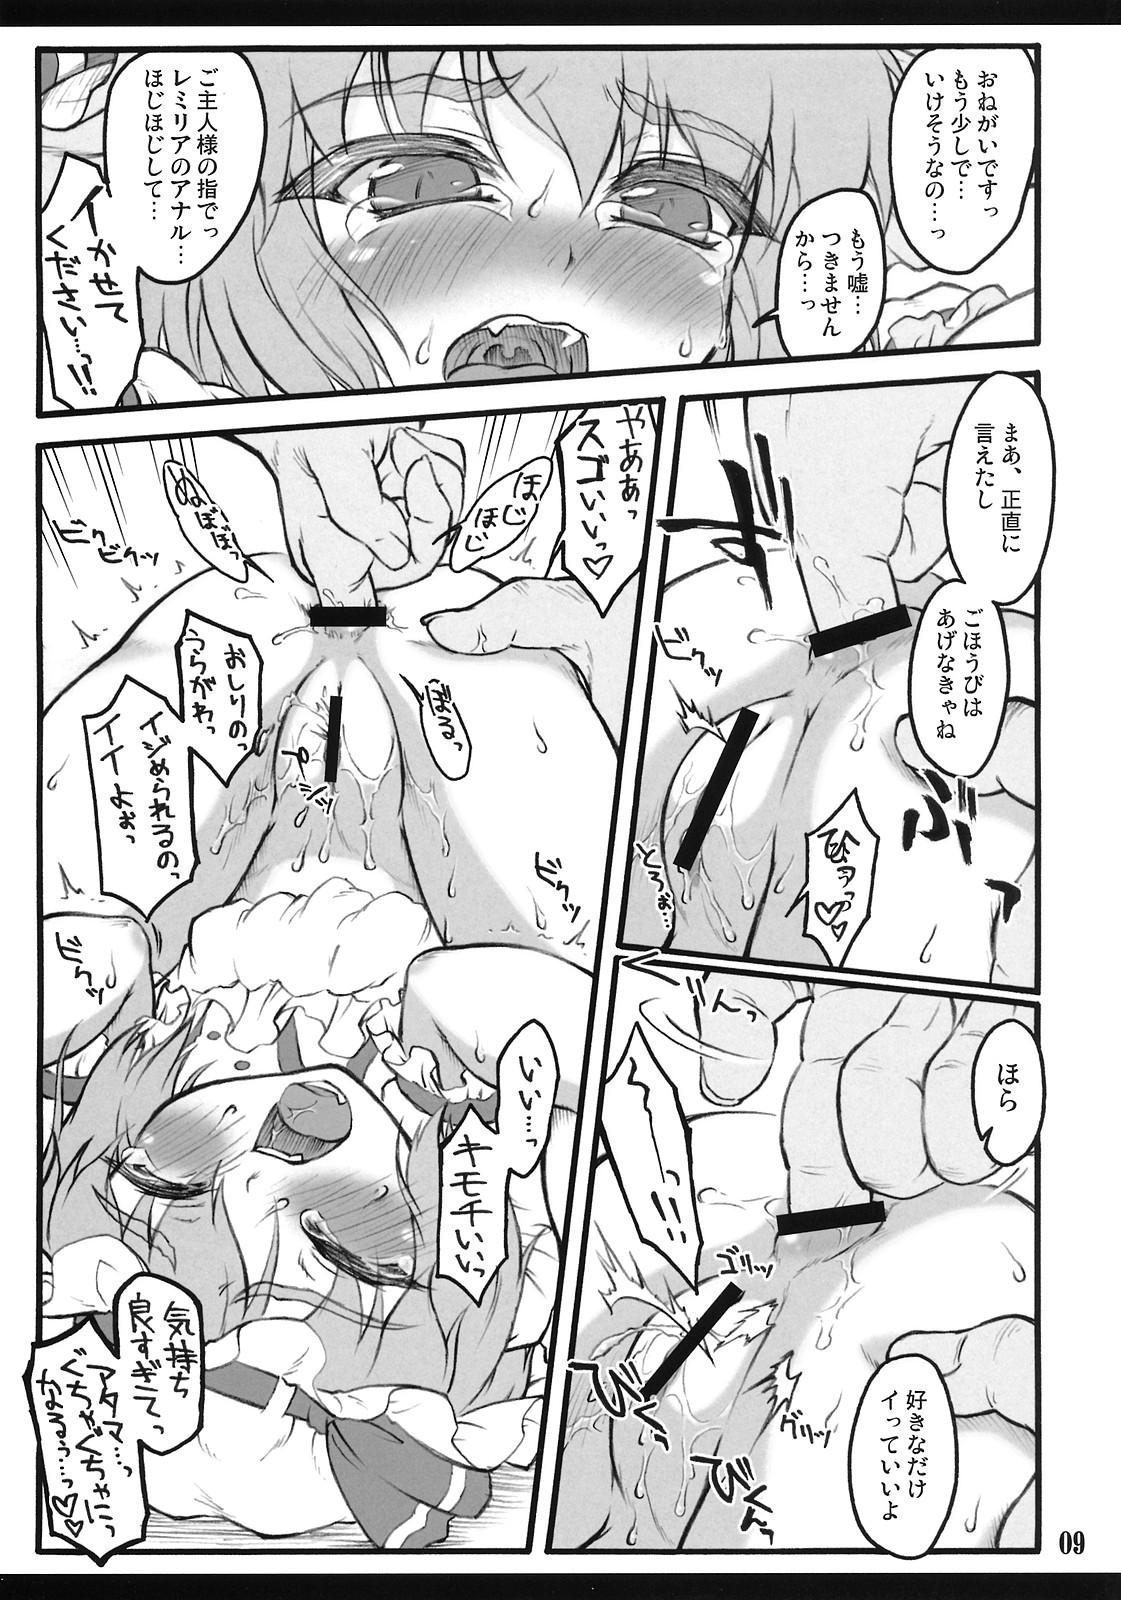 Stripping Flandre - Touhou project Underwear - Page 8